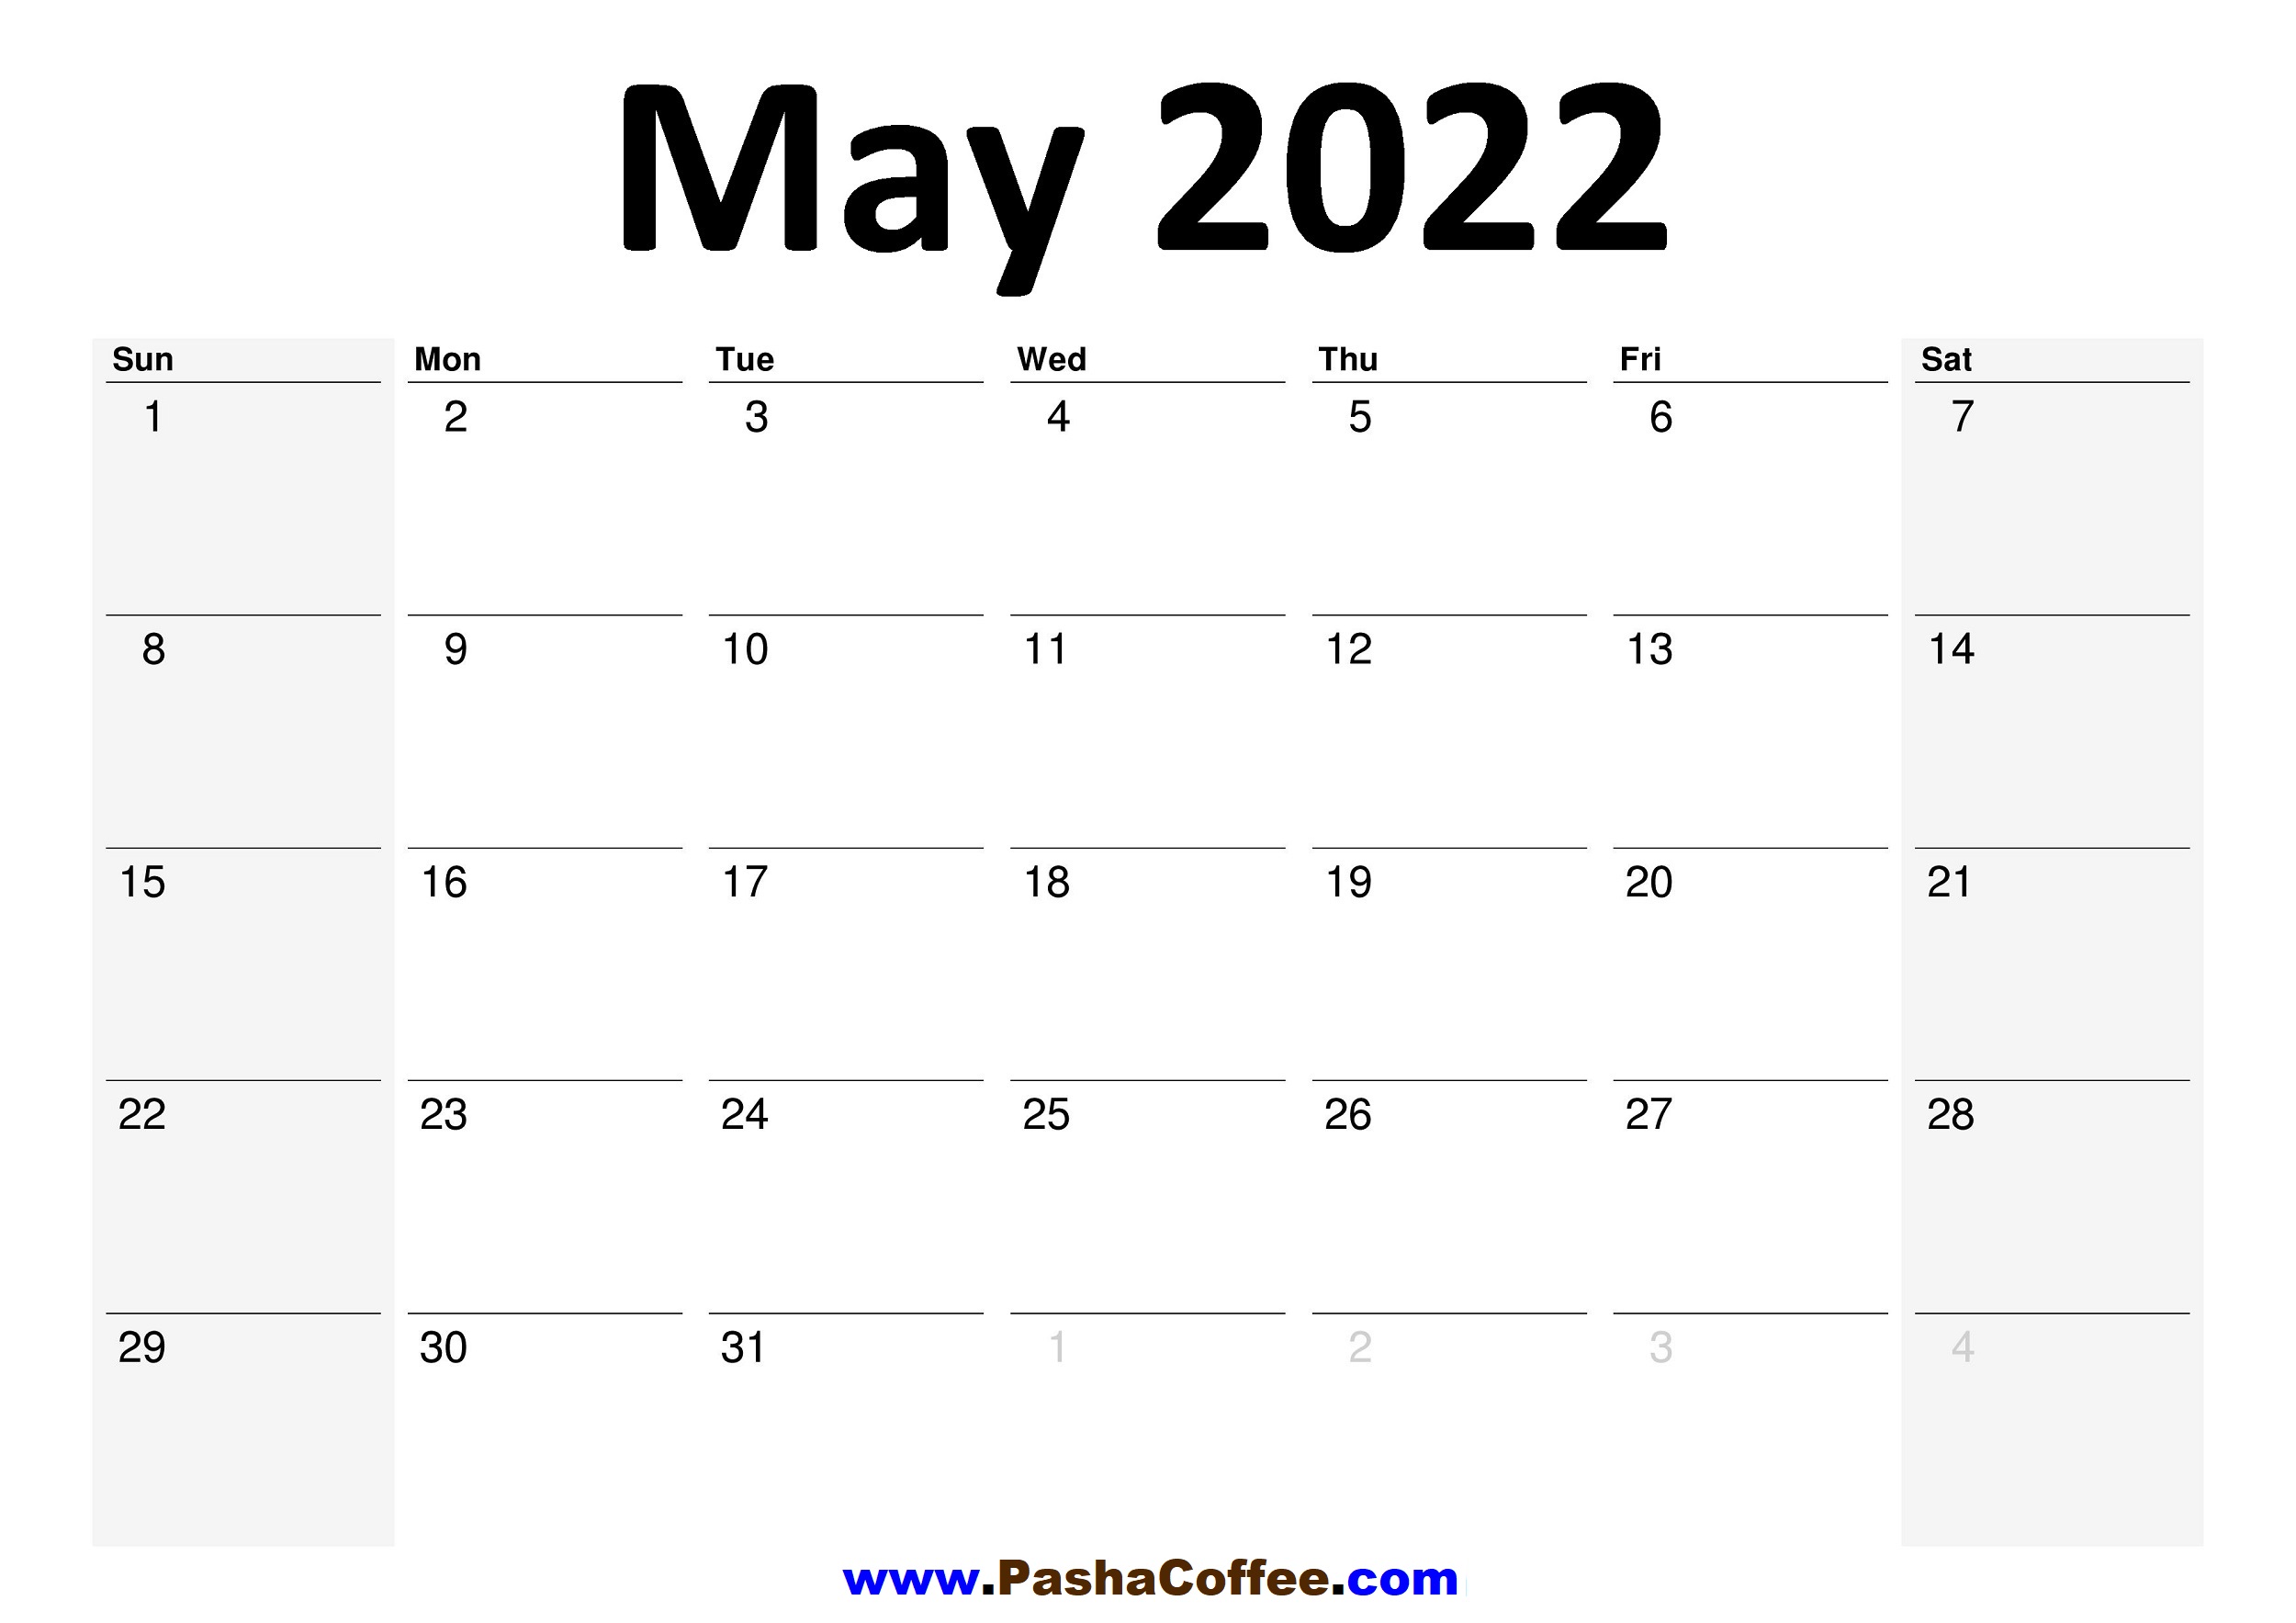 2022 may calendar planner printable monthly pashacoffee com